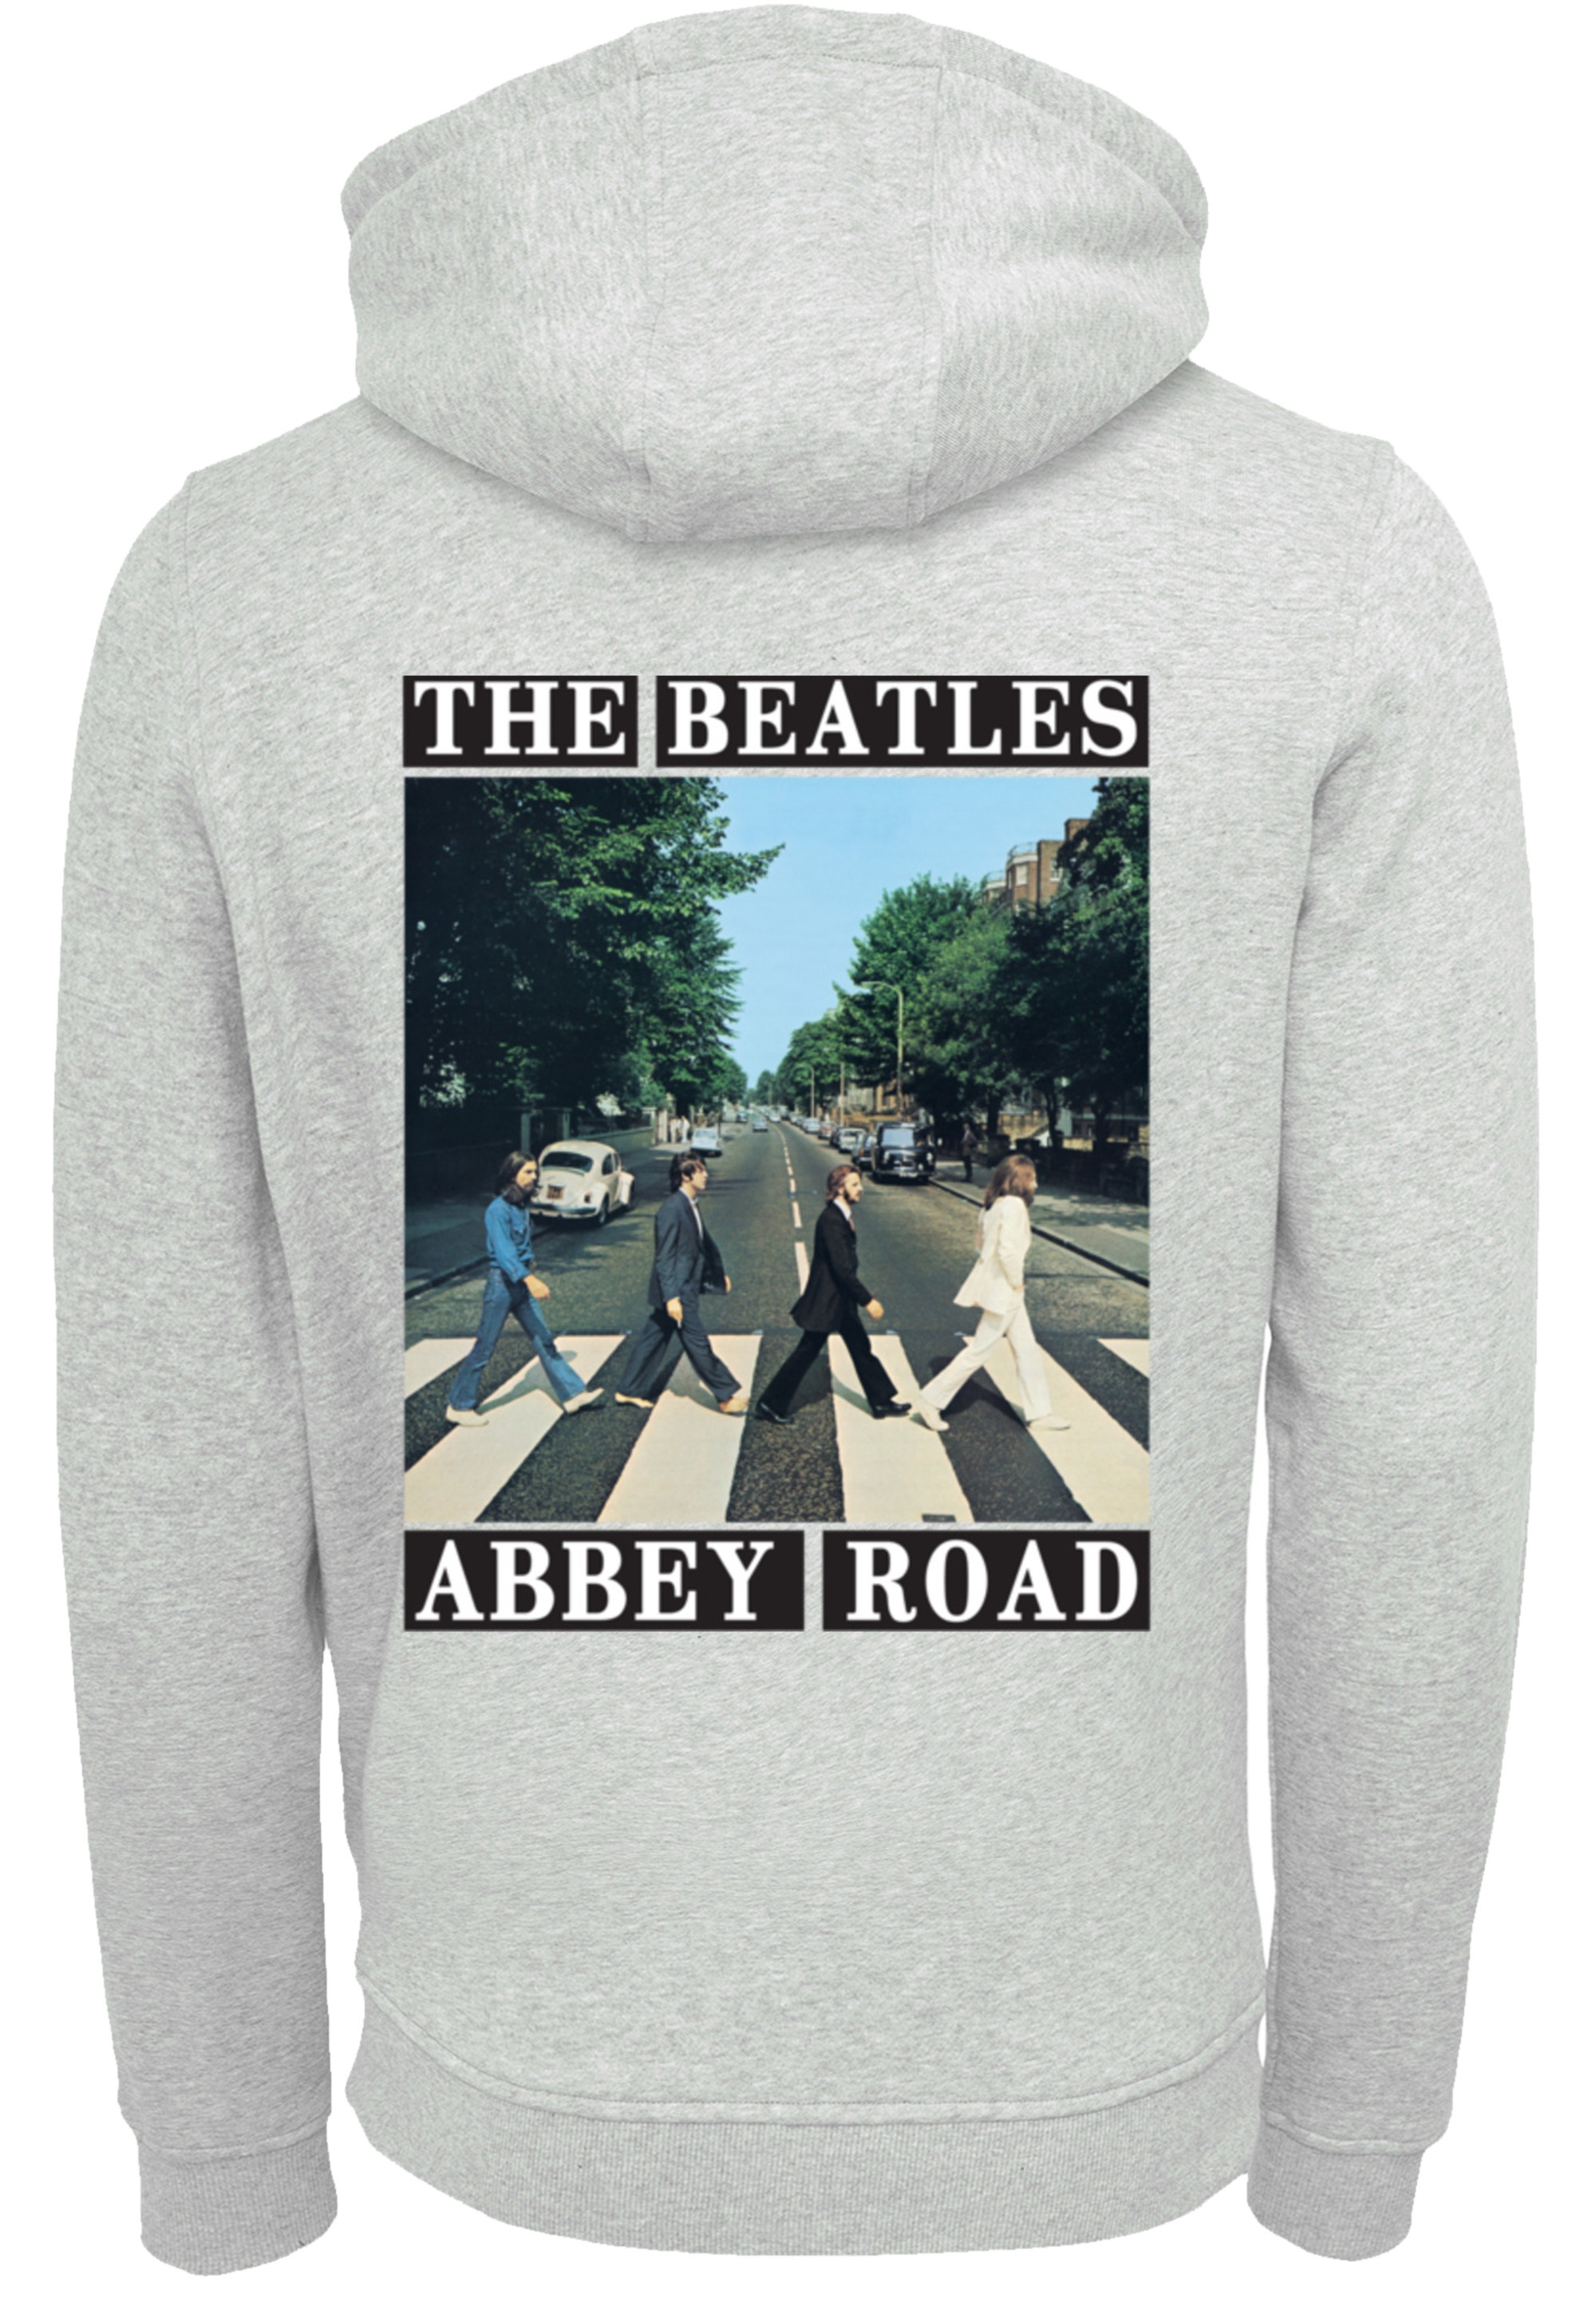 F4NT4STIC Kapuzenpullover »The Beatles Abbey | online walking Hoodie, Bequem Band«, Rock Road Warm, kaufen I\'m Musik